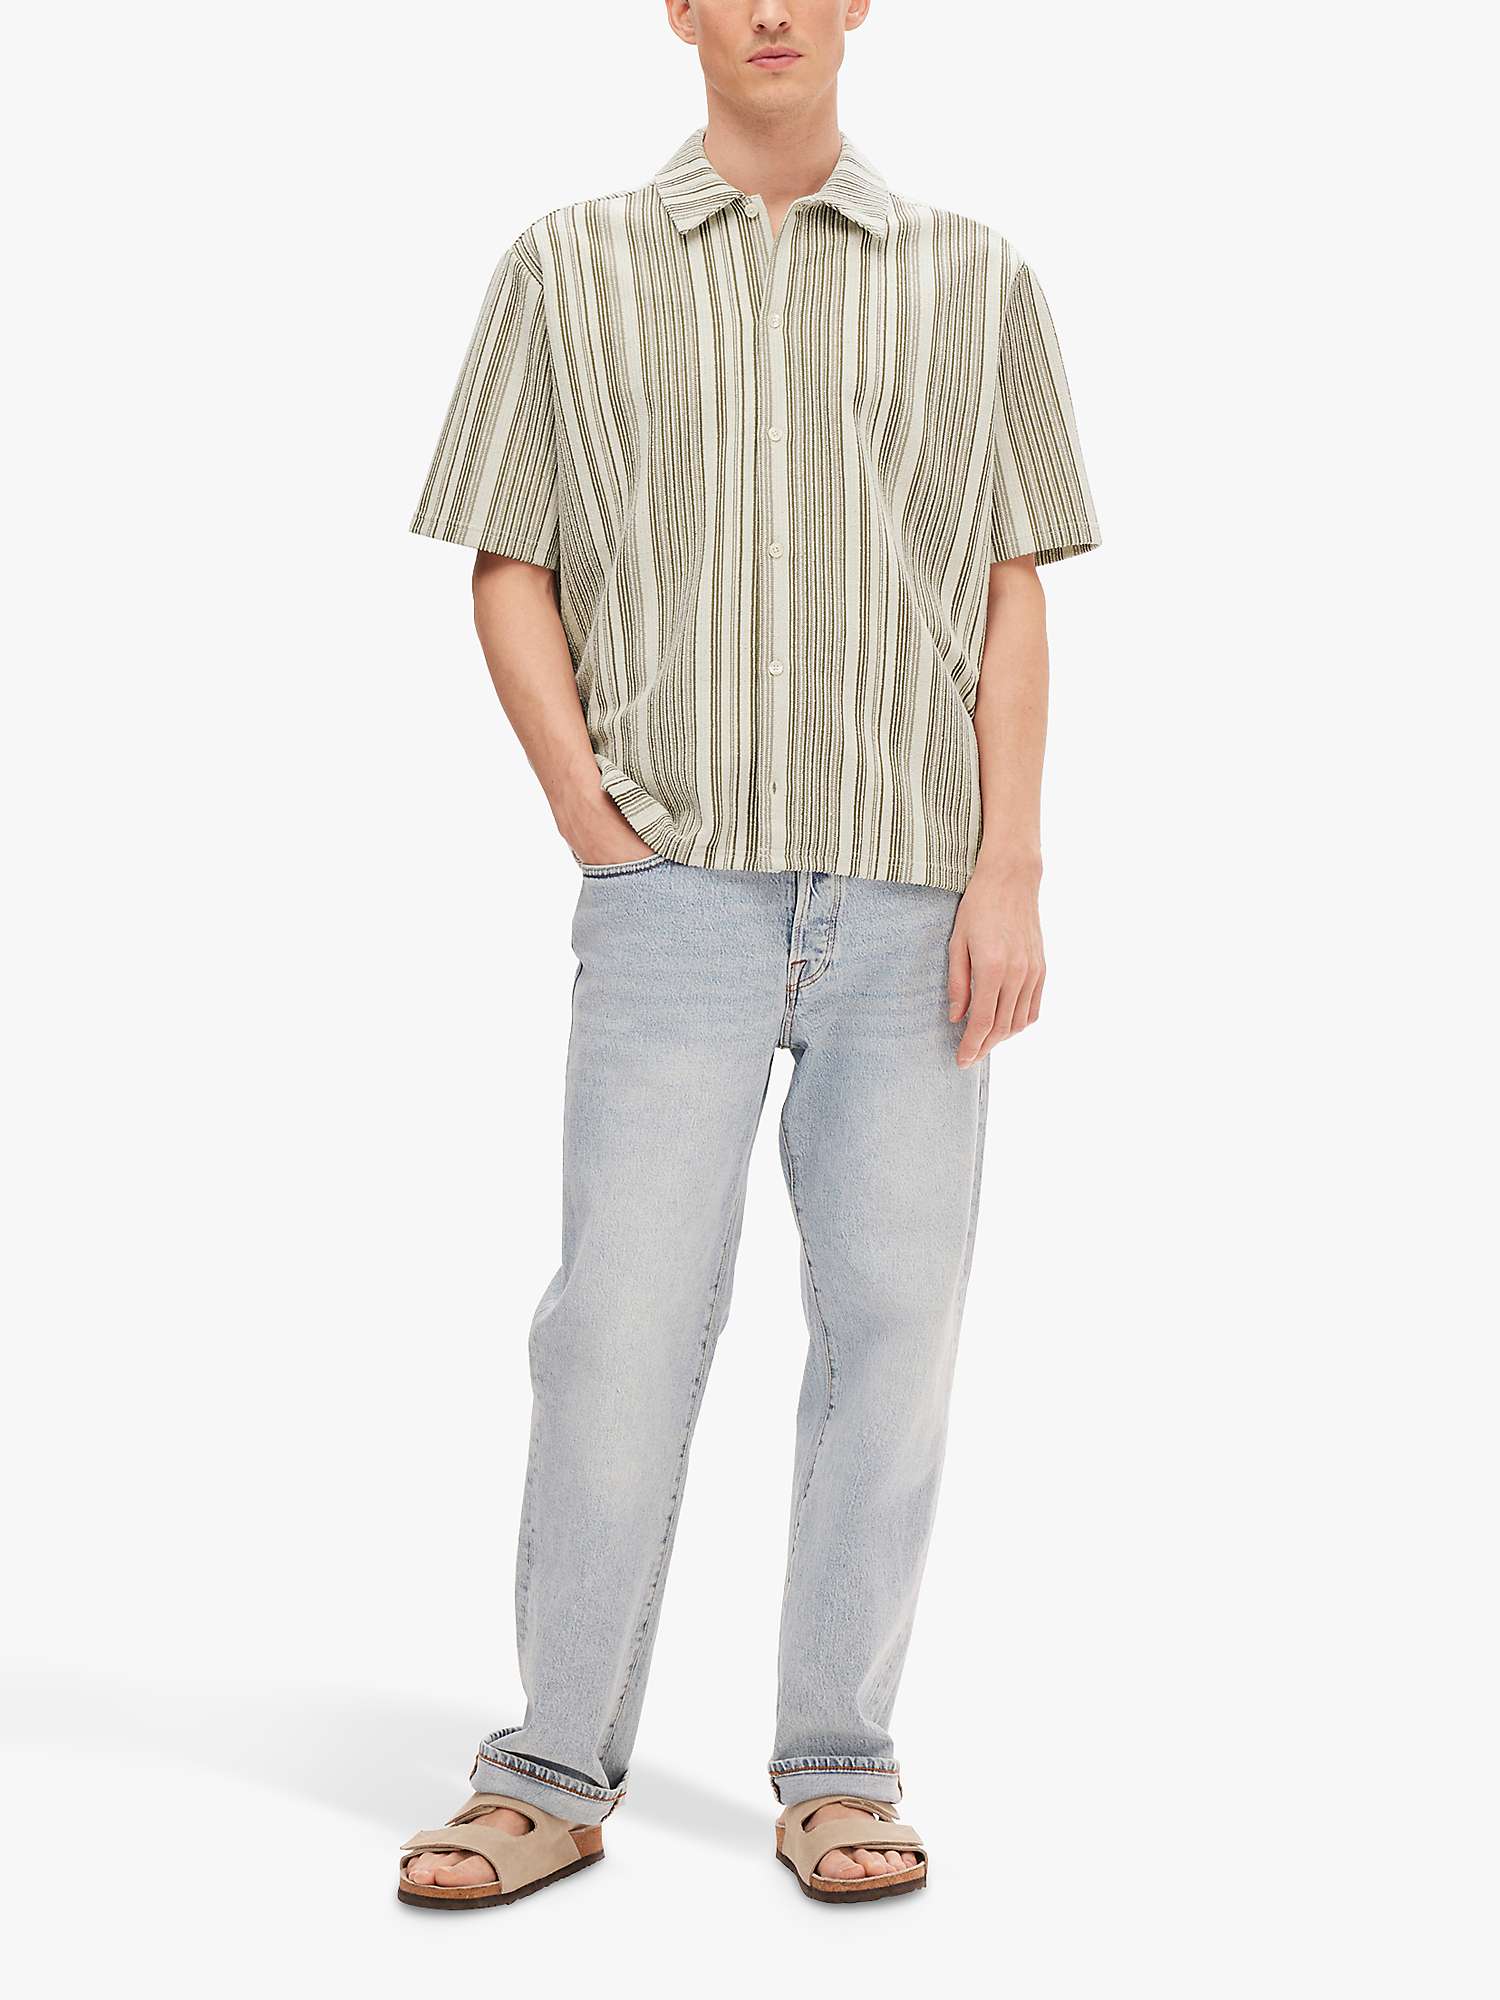 Buy SELECTED HOMME Knitted Boxy Short Sleeve Shirt, Green/Multi Online at johnlewis.com